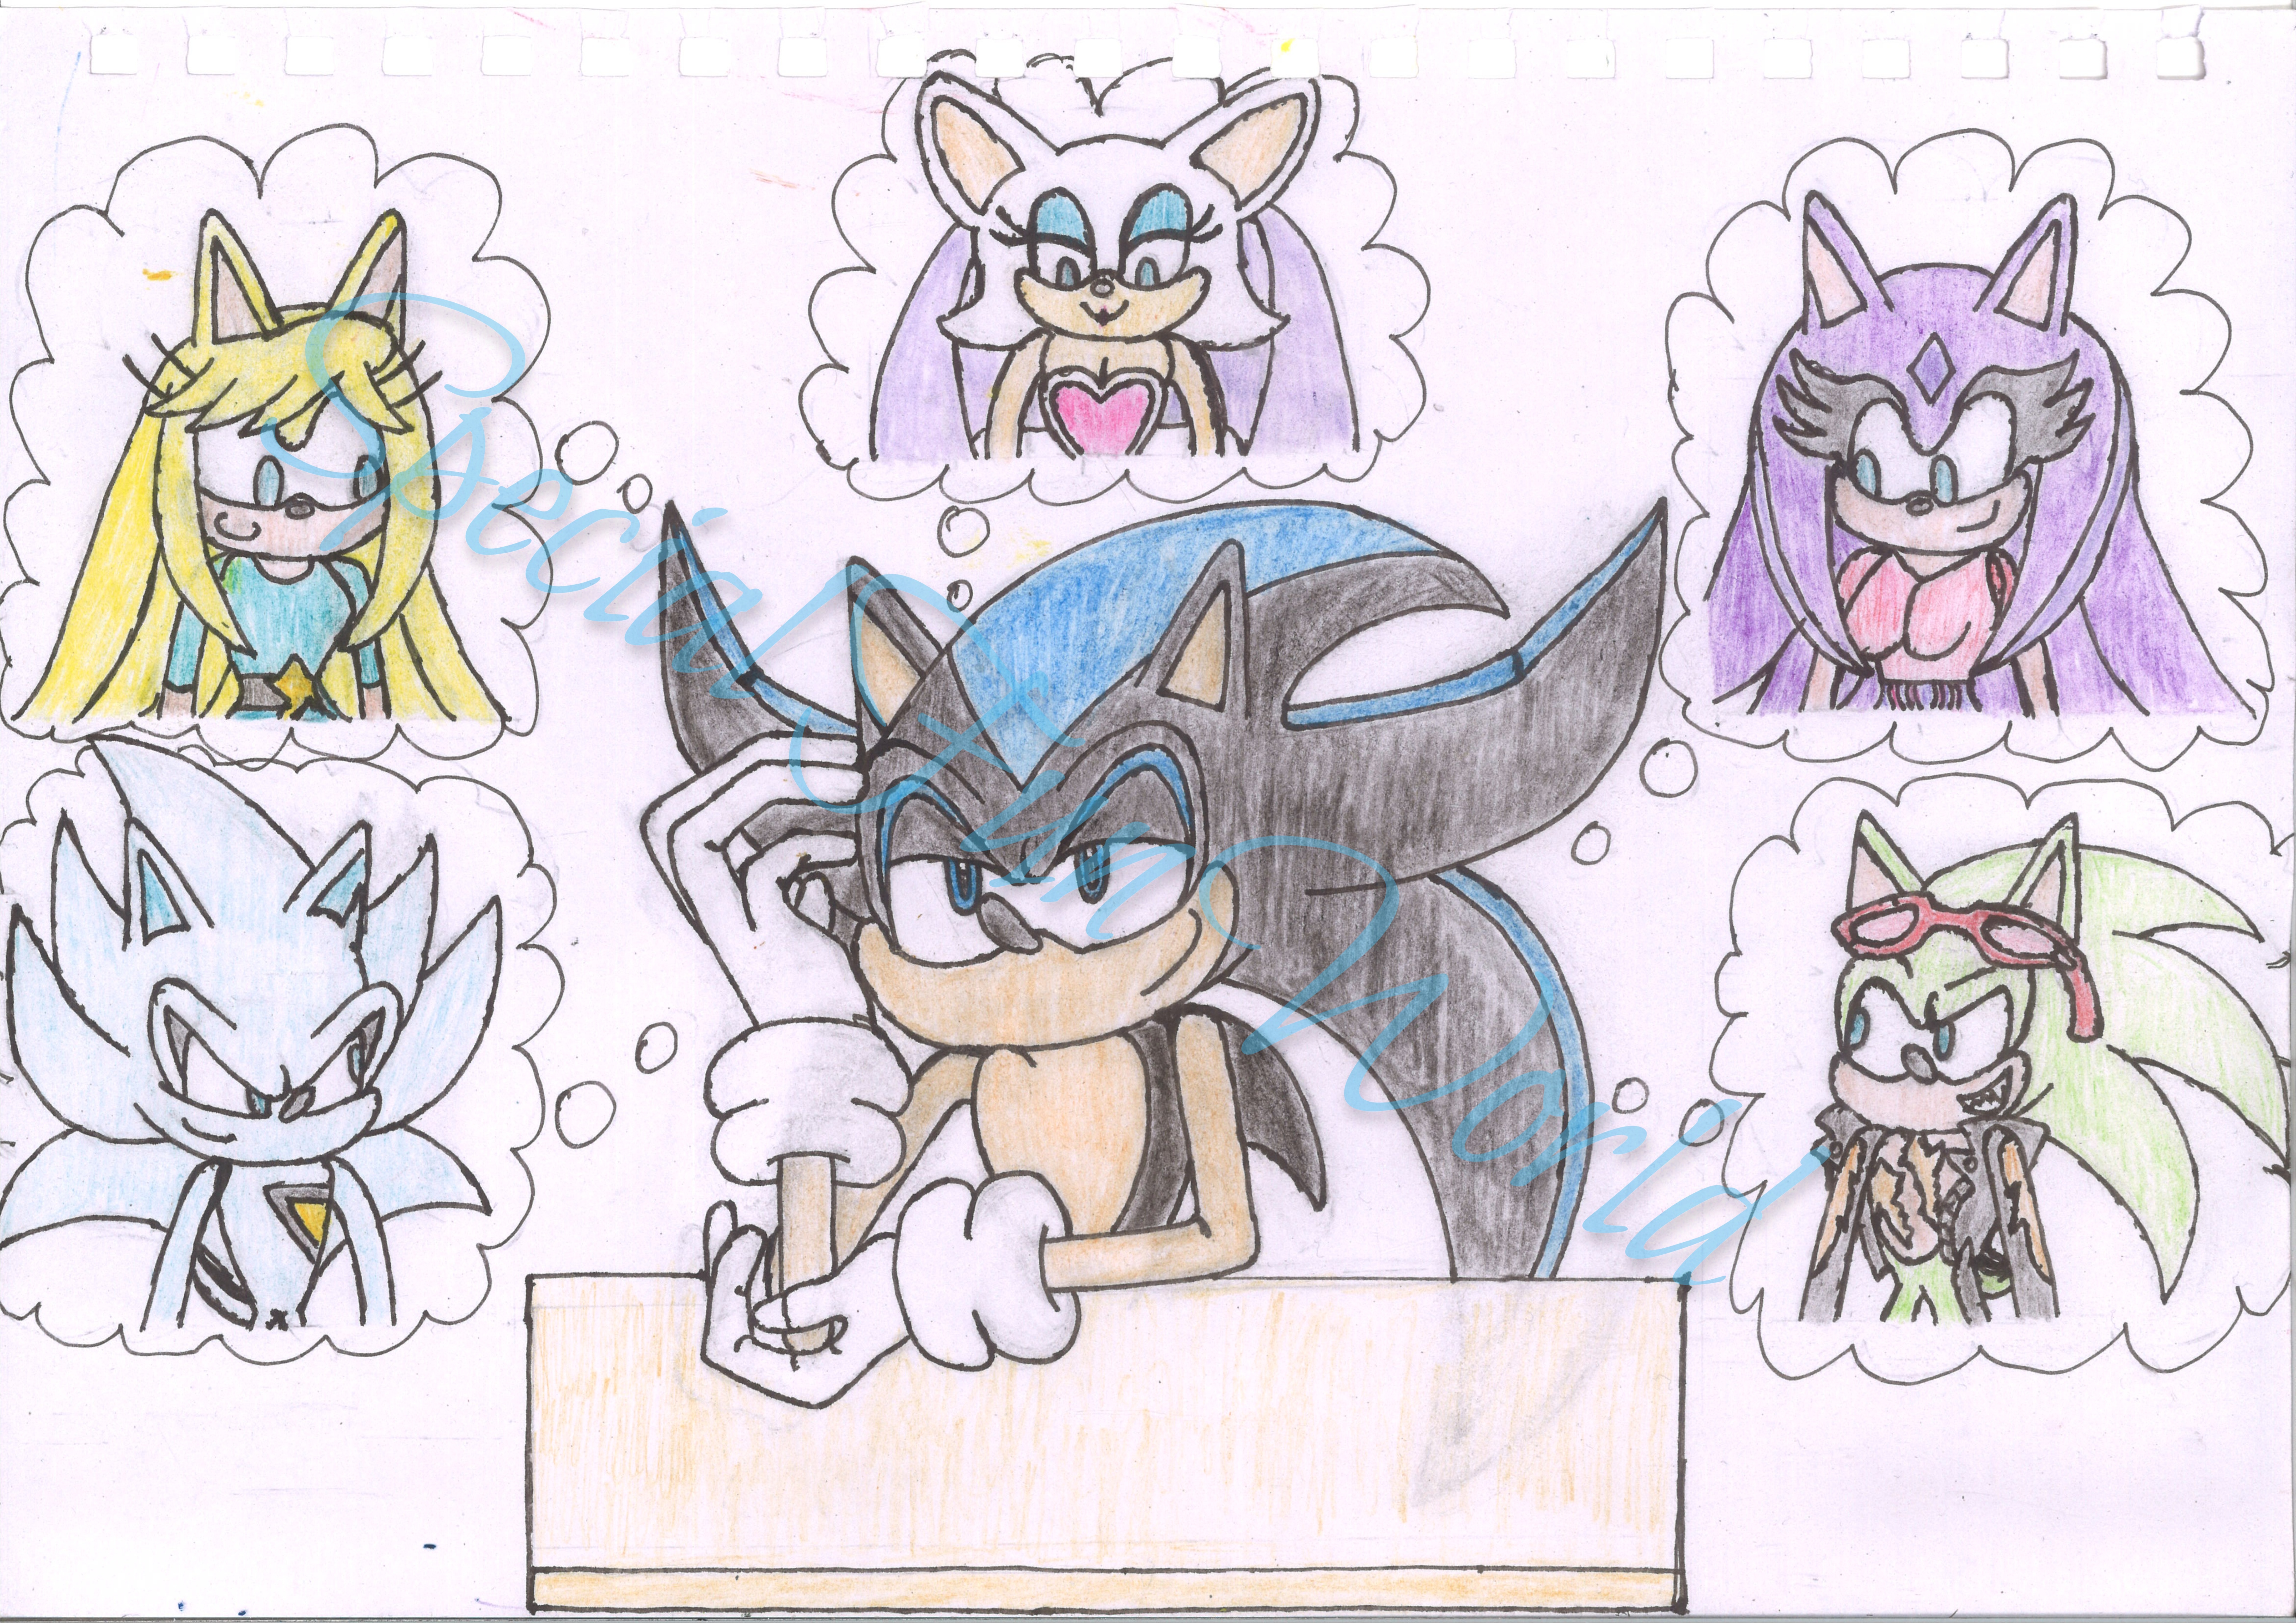 How to ship Sonic and Shadow + by ClassicMariposAzul on DeviantArt